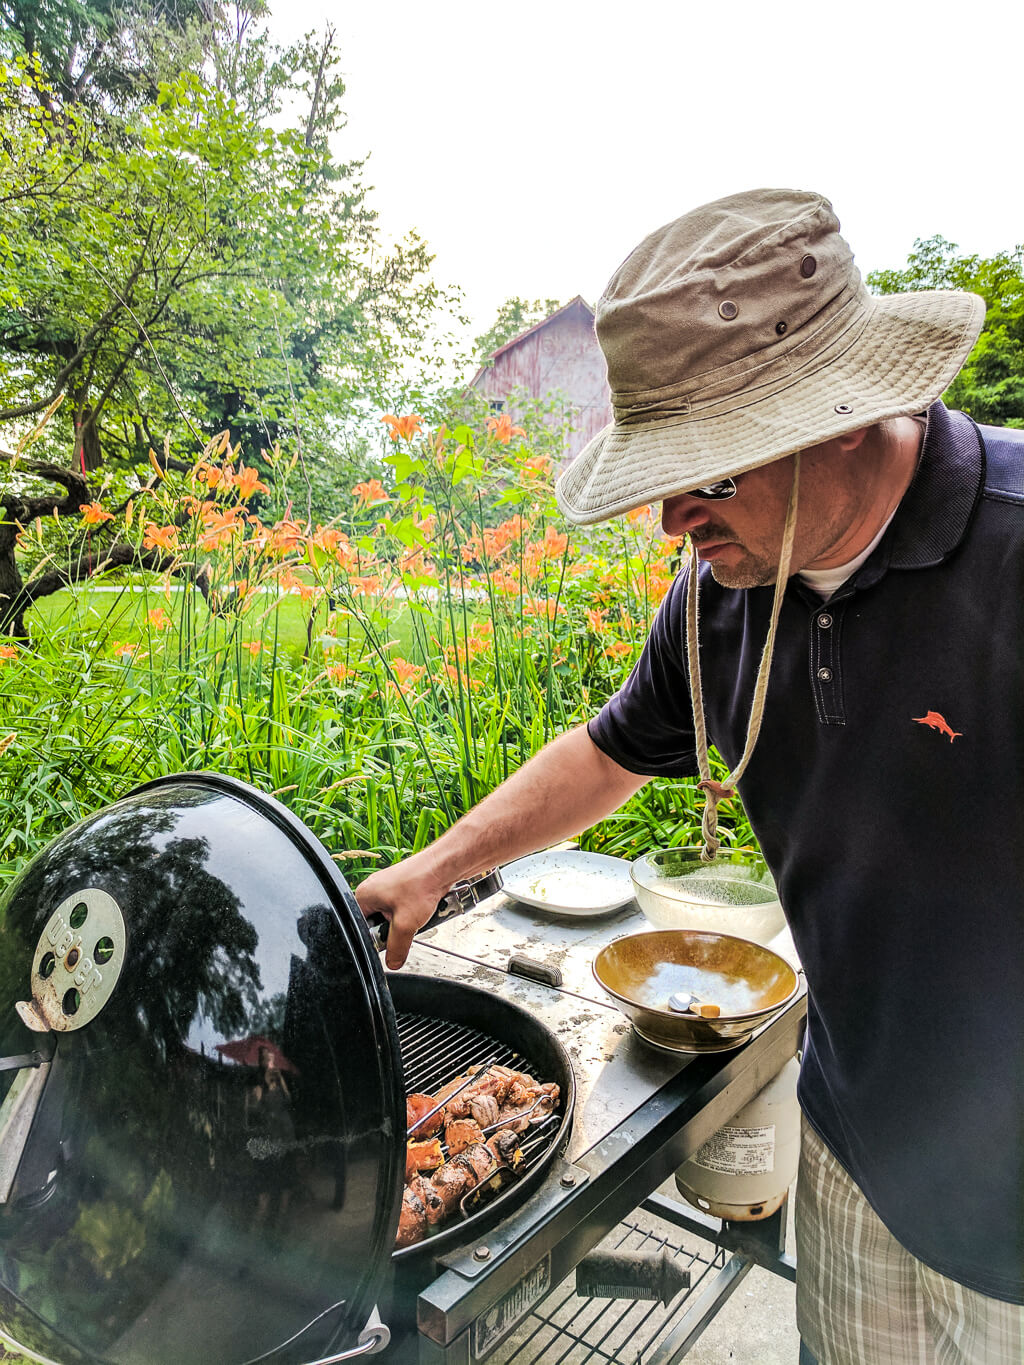 Summer grilling at the farm